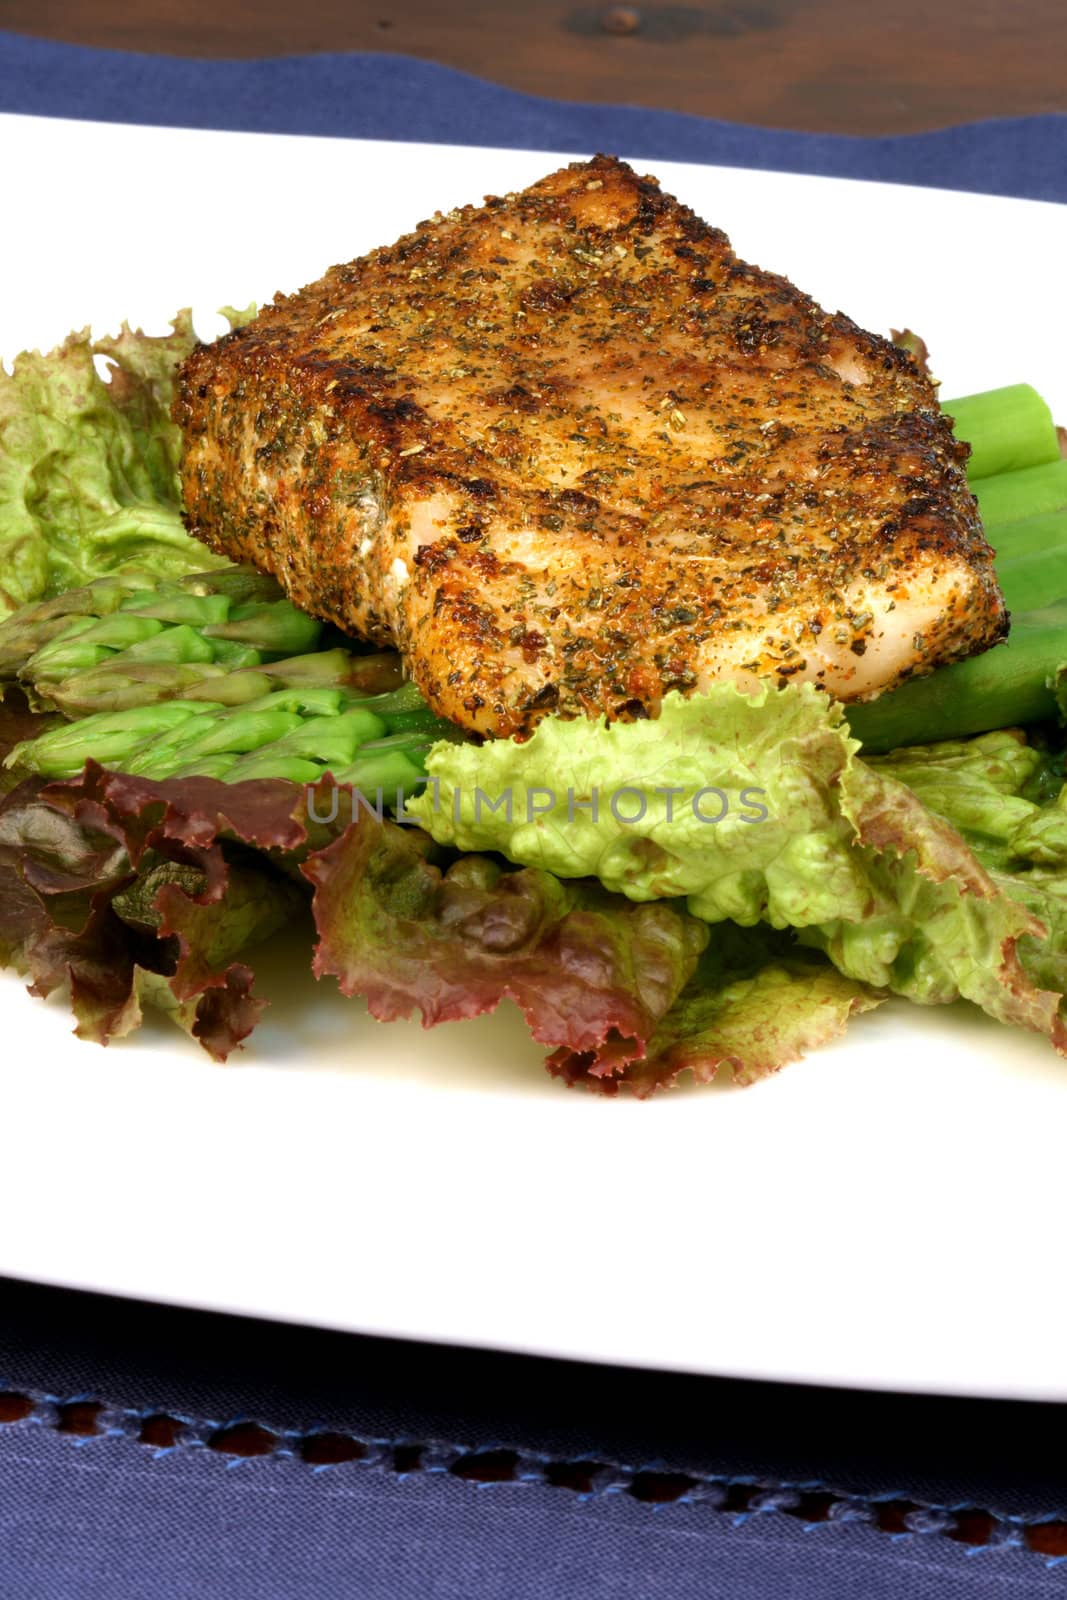 delicious grilled sea bass, seasoned with fine spices with asparagus and lettuce bed 